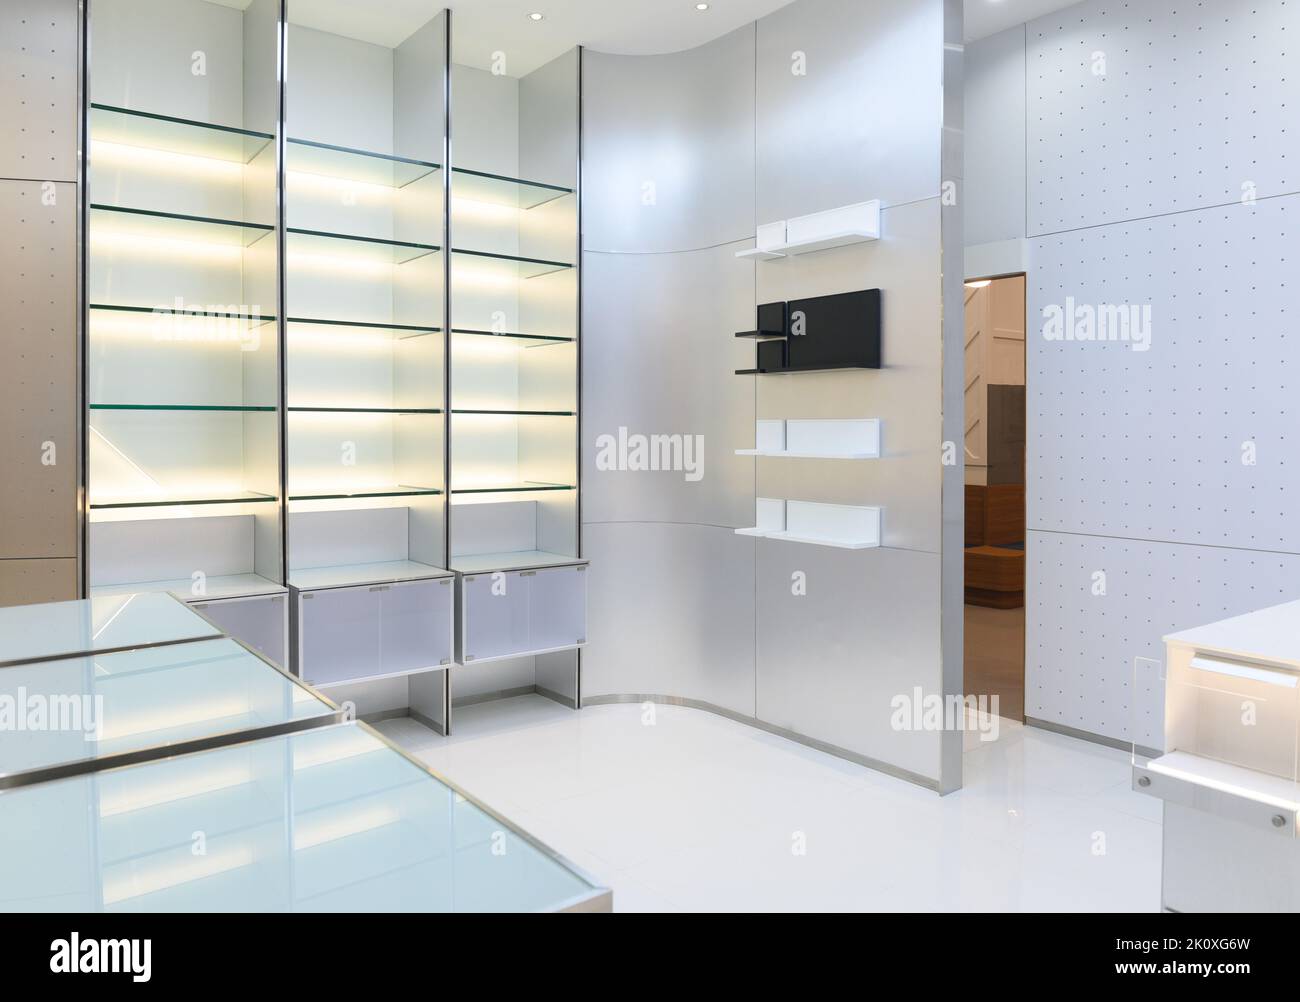 Interior of empty store with shelves Stock Photo